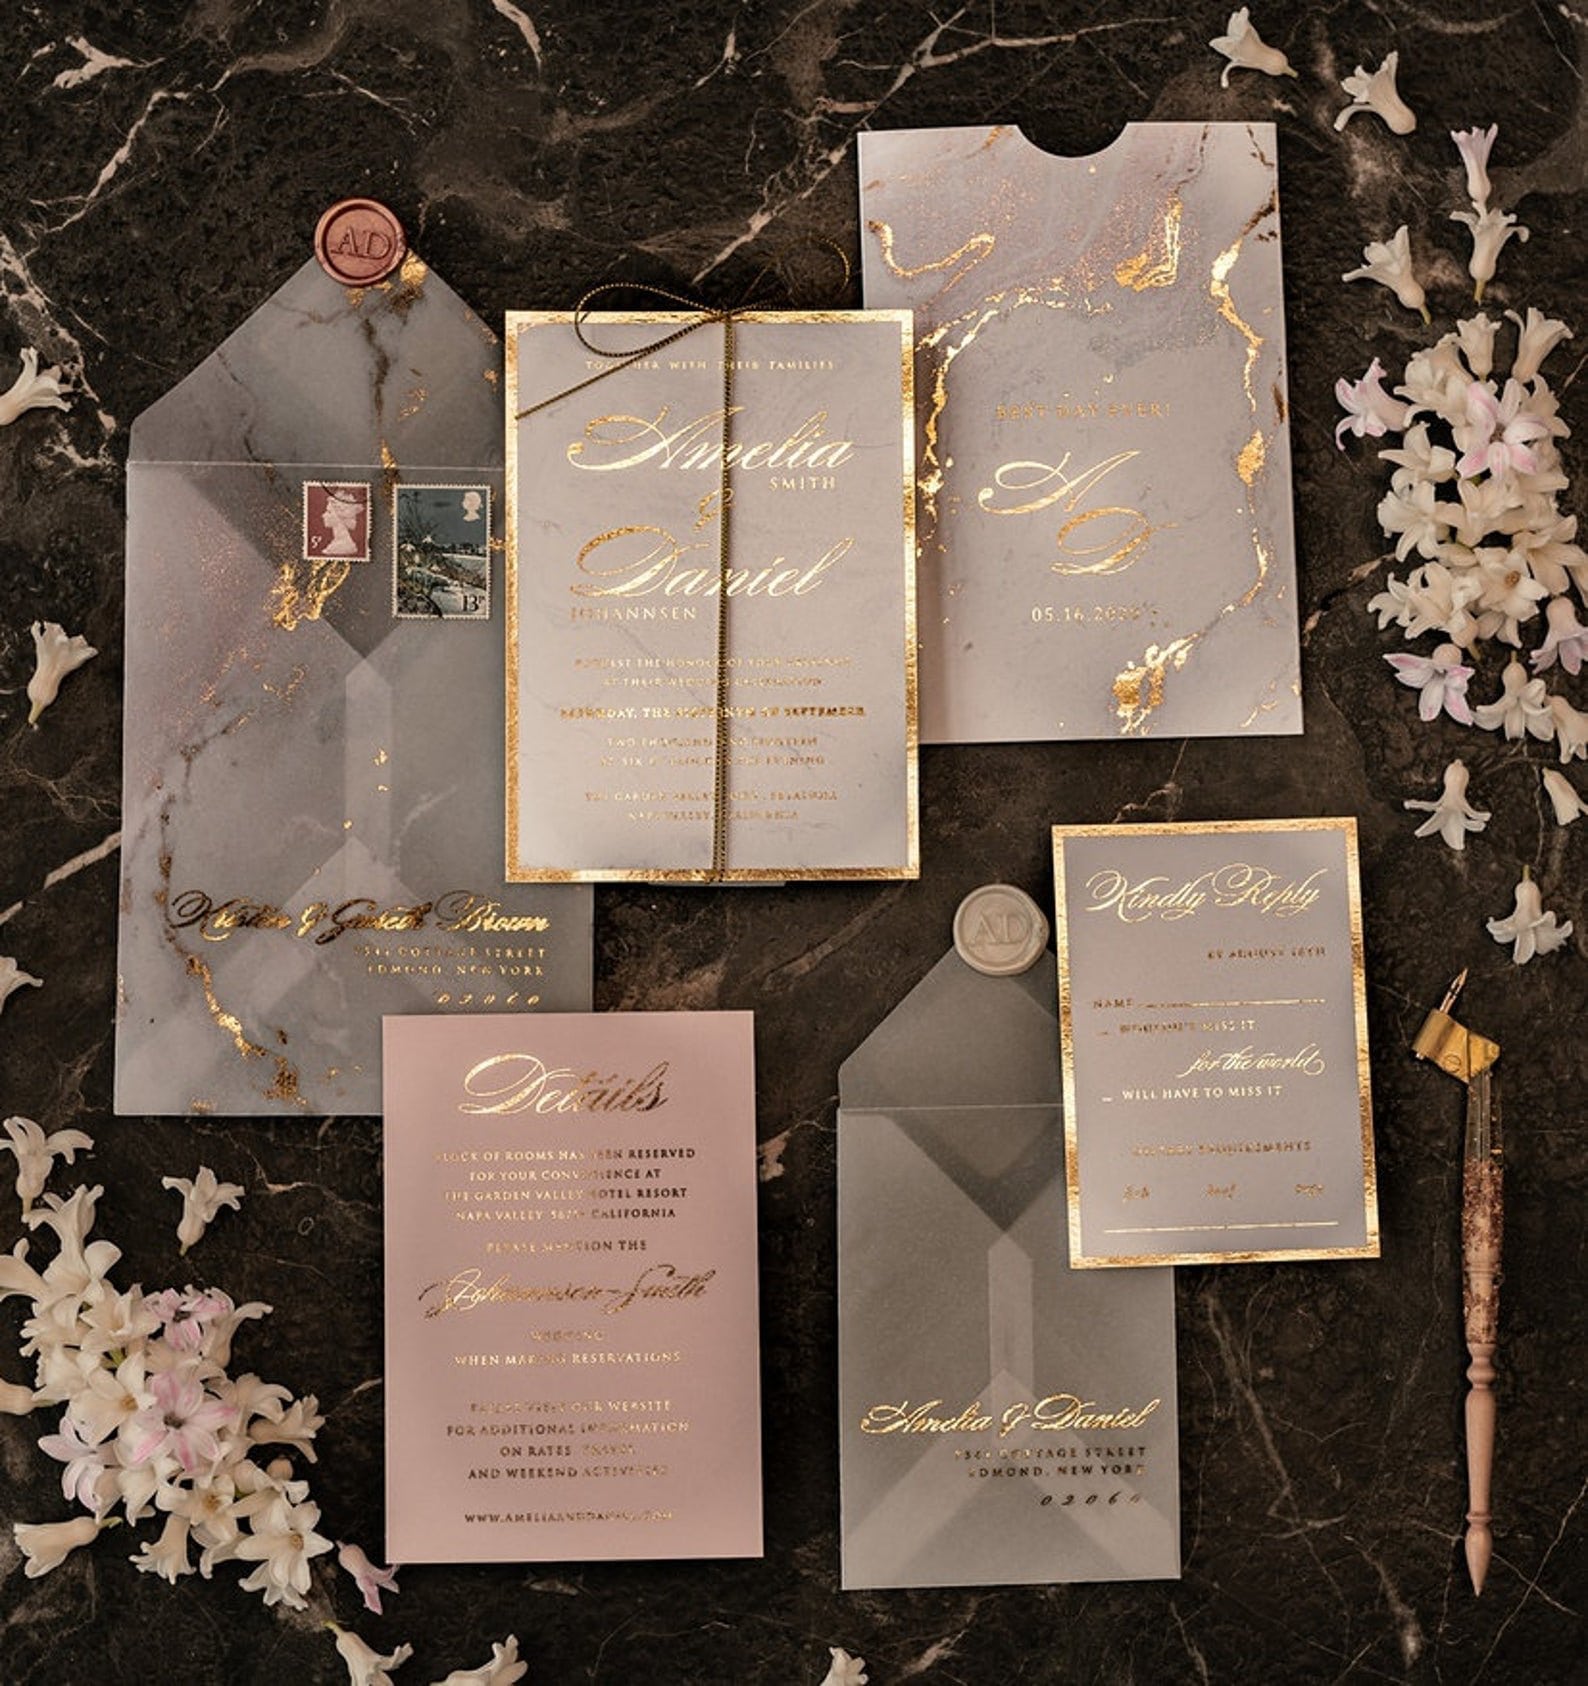 Gold Foil Wedding Invitations from Etsy | SouthBound Bride